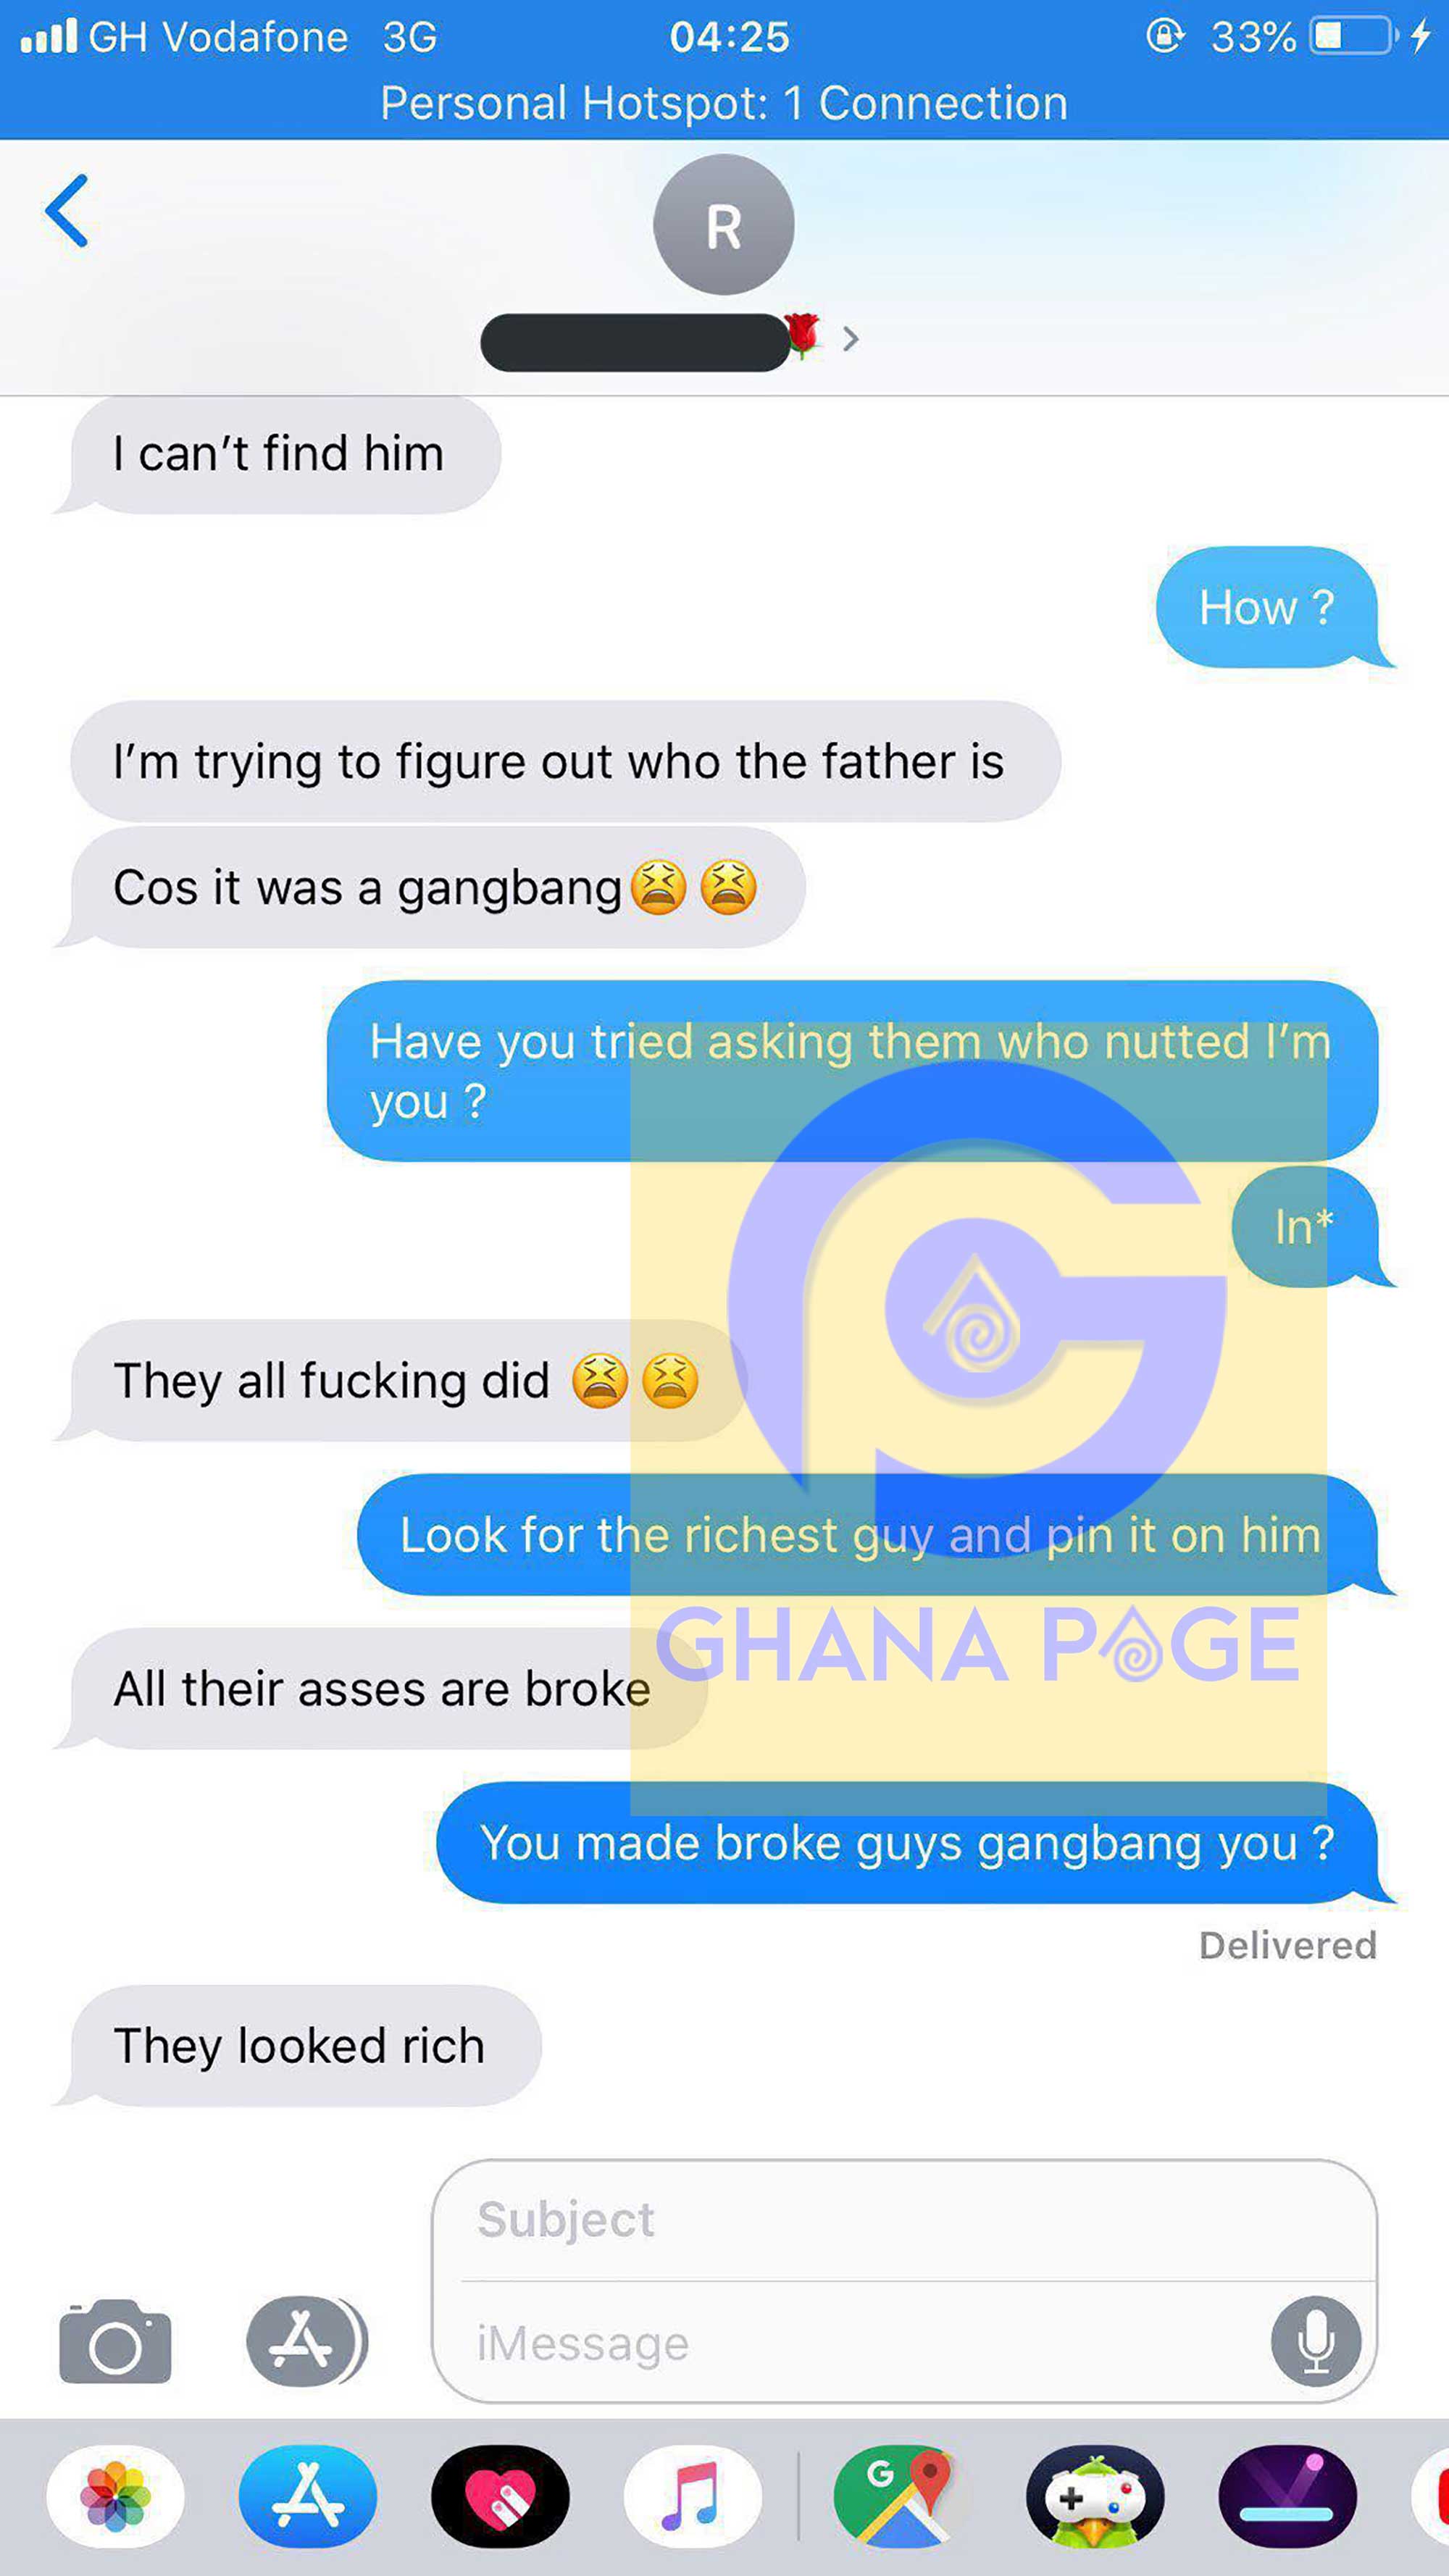 Slay queen cries about who made her pregnant after giving herself to a 'gang'